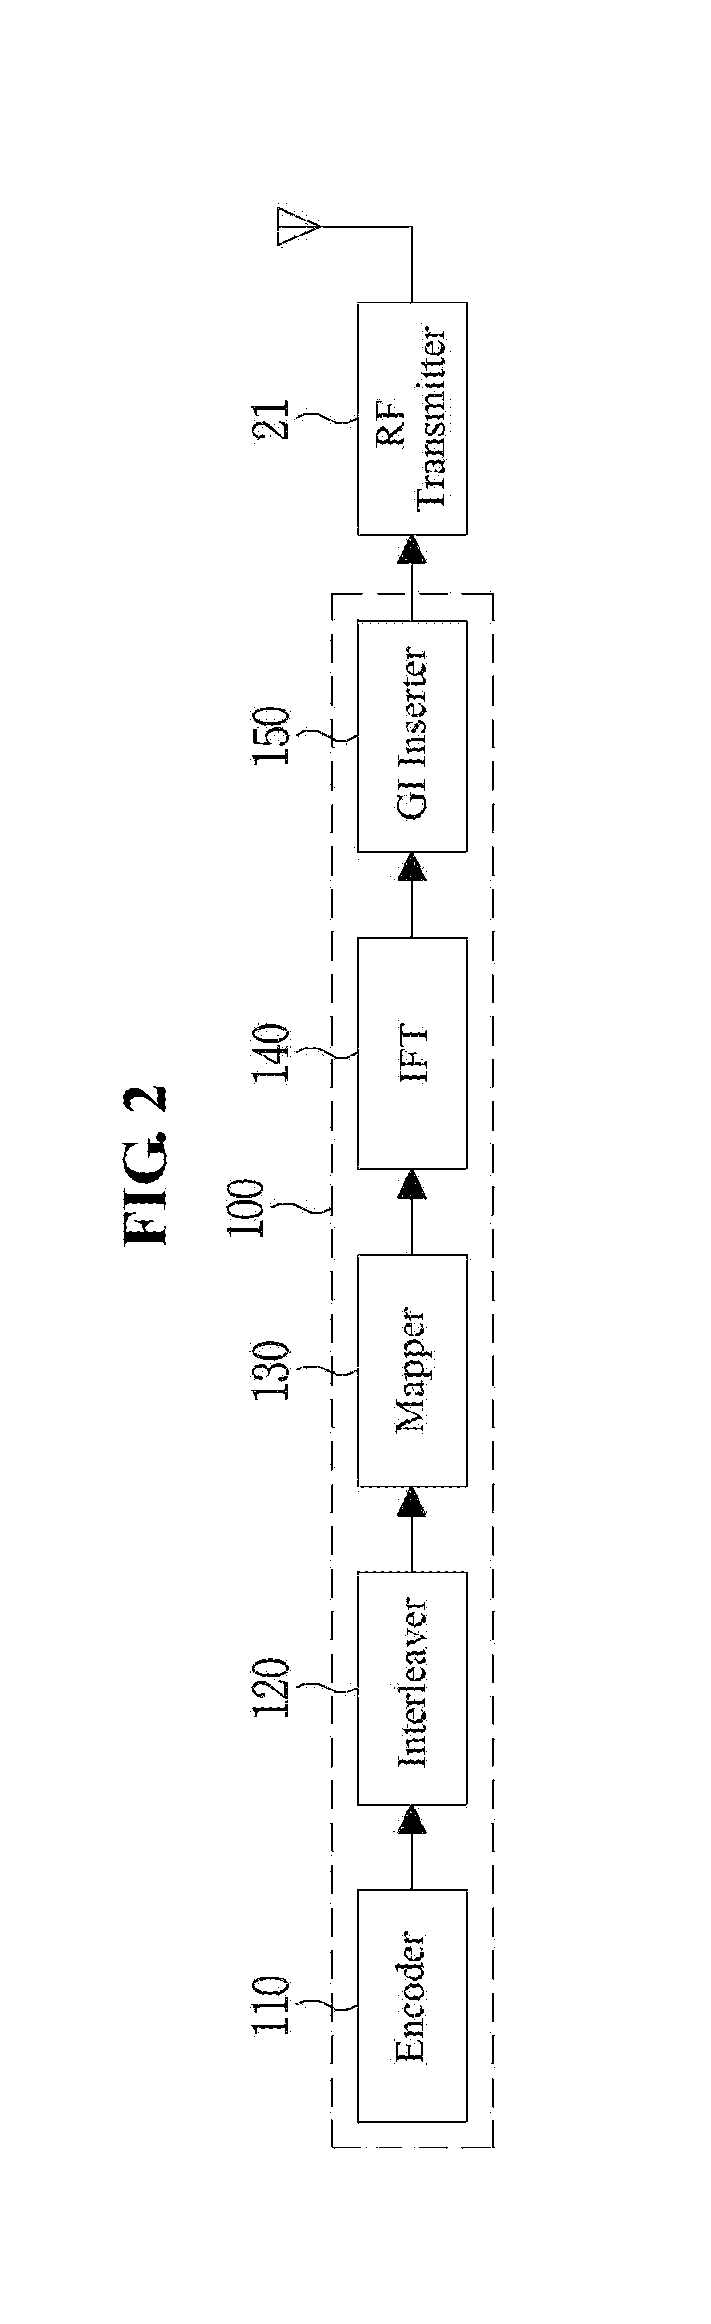 Method and apparatus for uplink channel access in a high efficiency wireless LAN